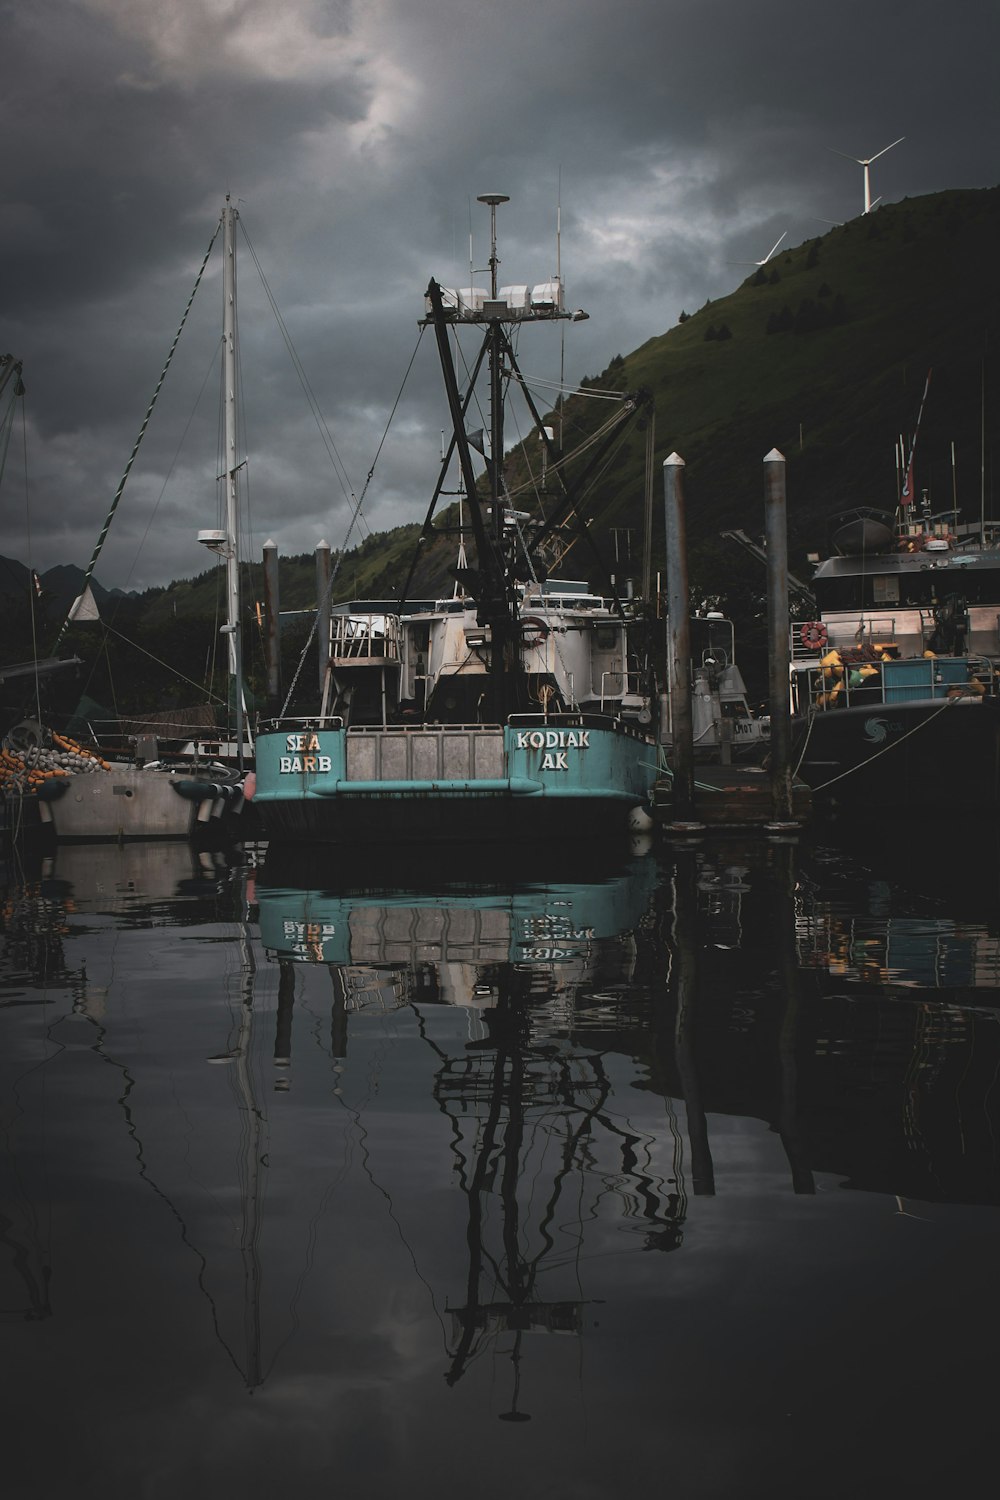 a boat is docked in a harbor on a cloudy day